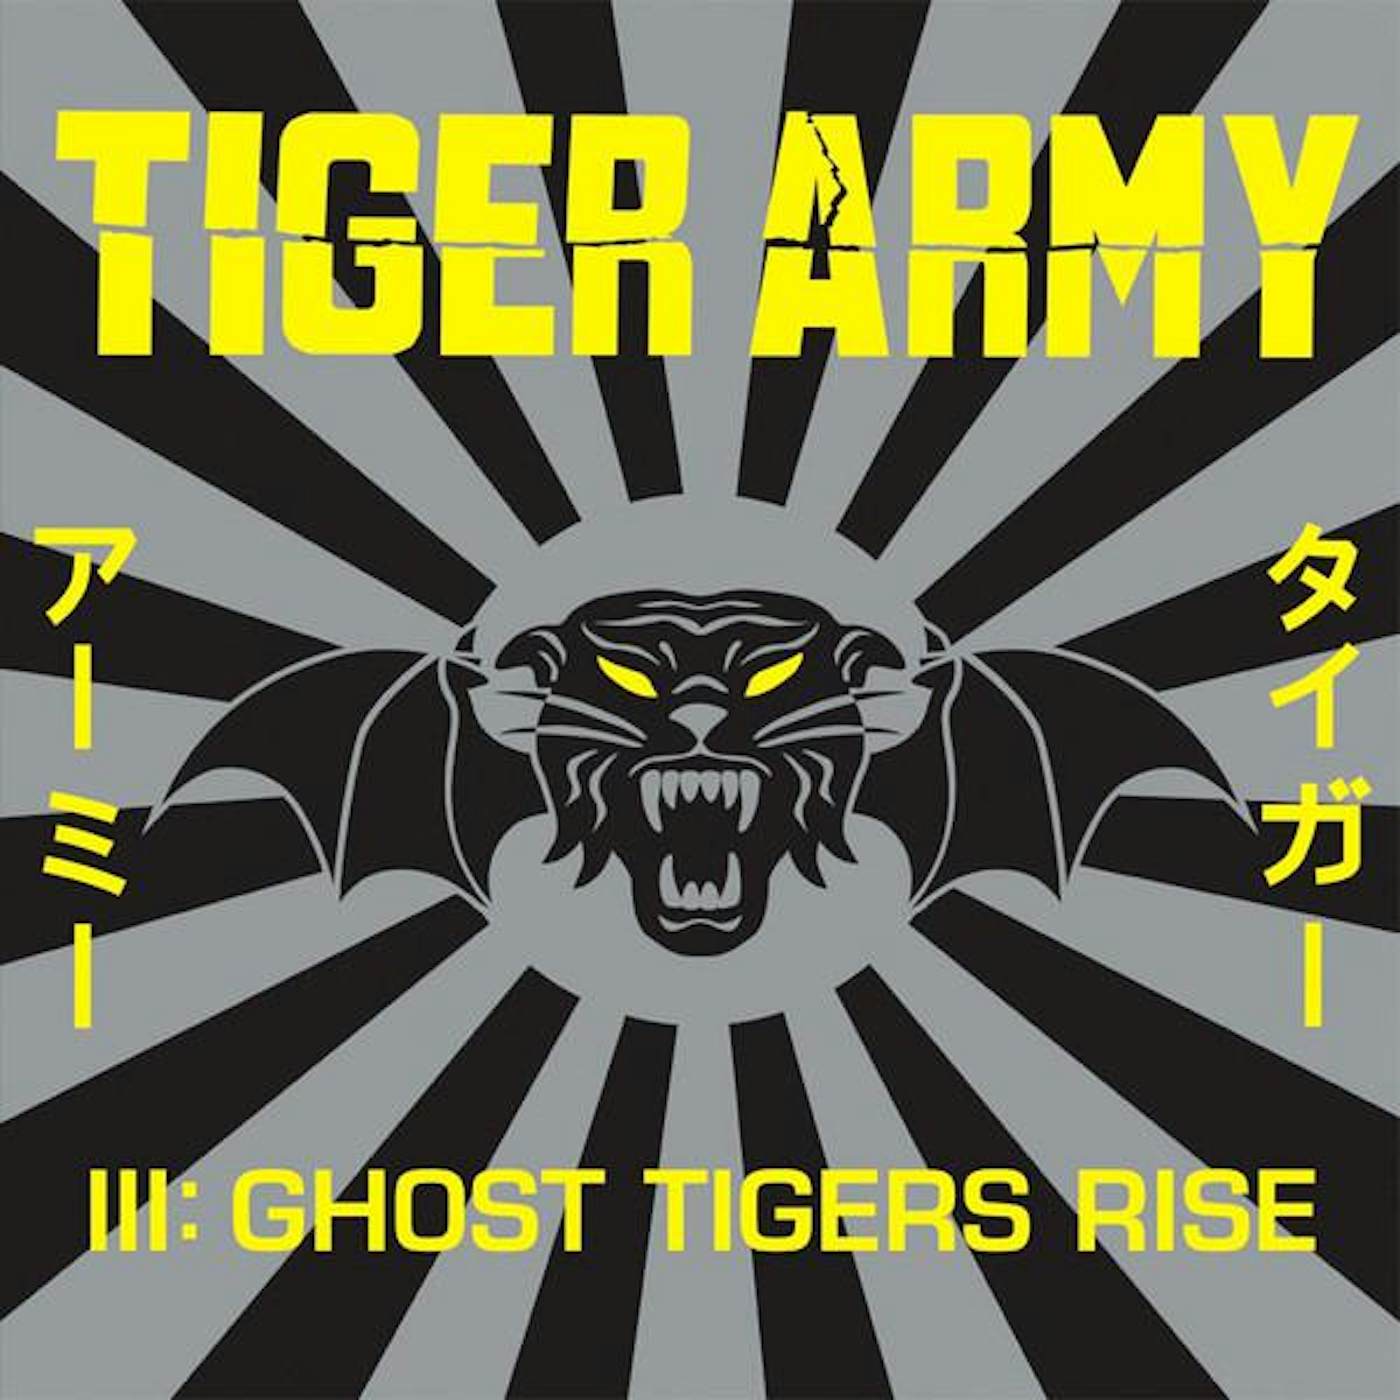 Tiger Army Iii: Ghost Tigers Rise Vinyl Record